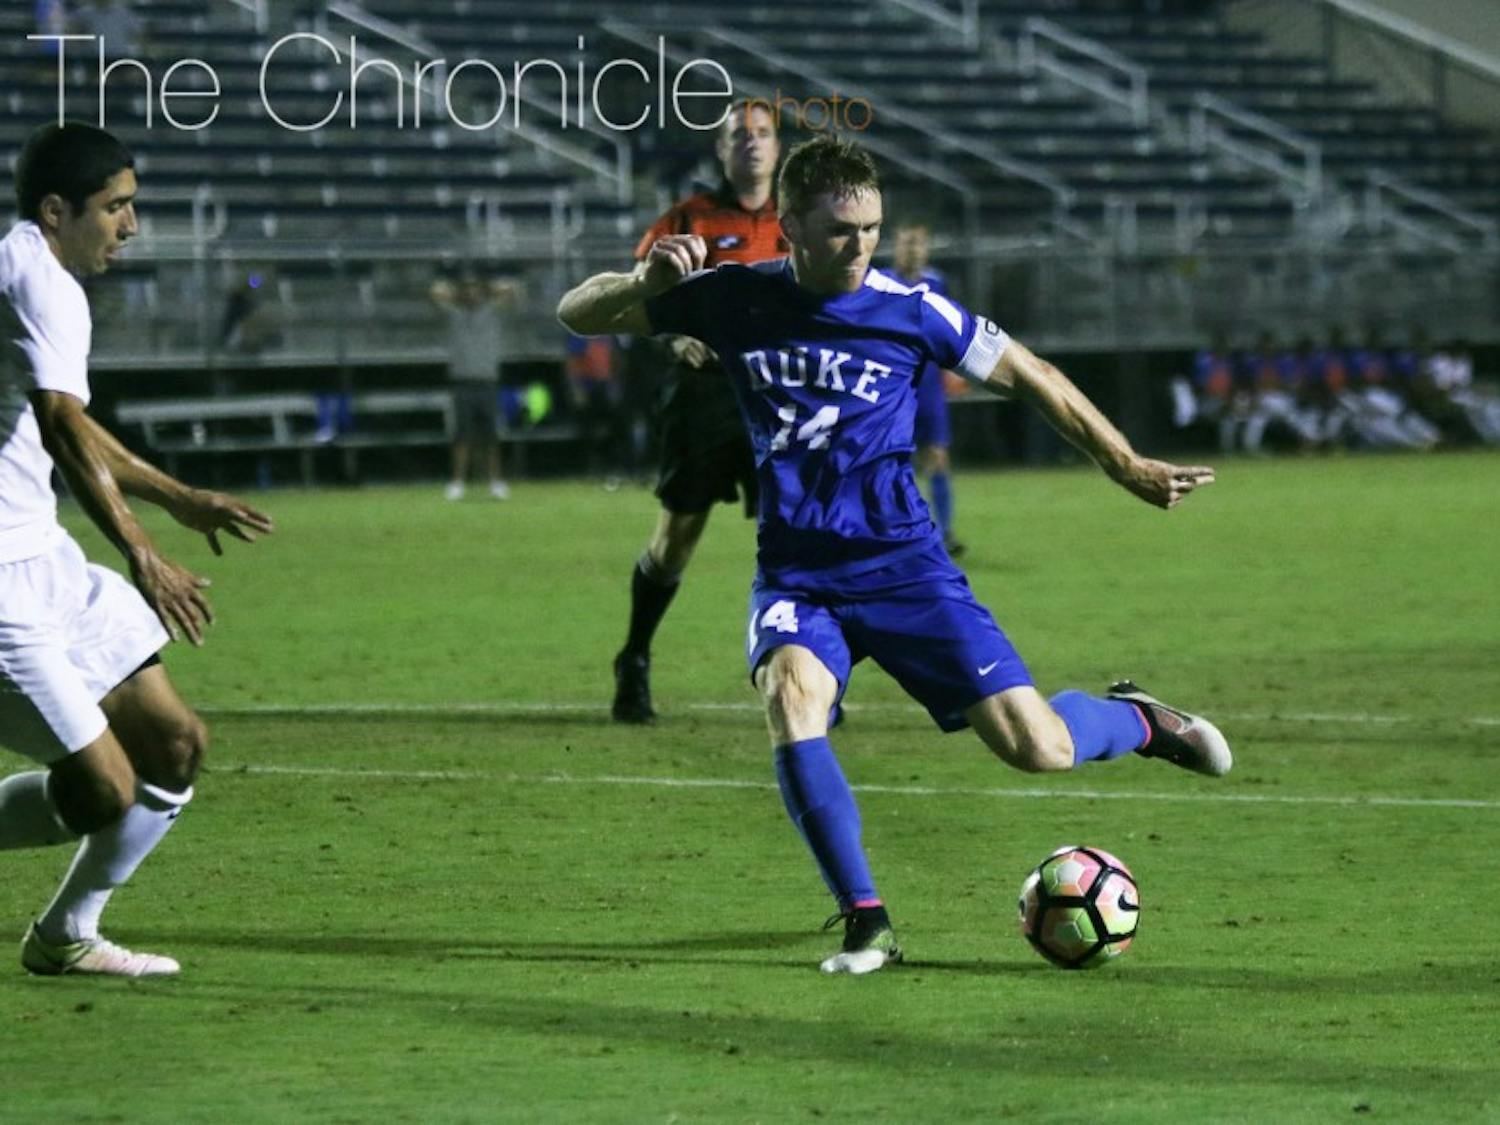 Ryan Thompson and the Blue Devils have their work cut out for them against a North Carolina defense that allows 0.5 goals per game.